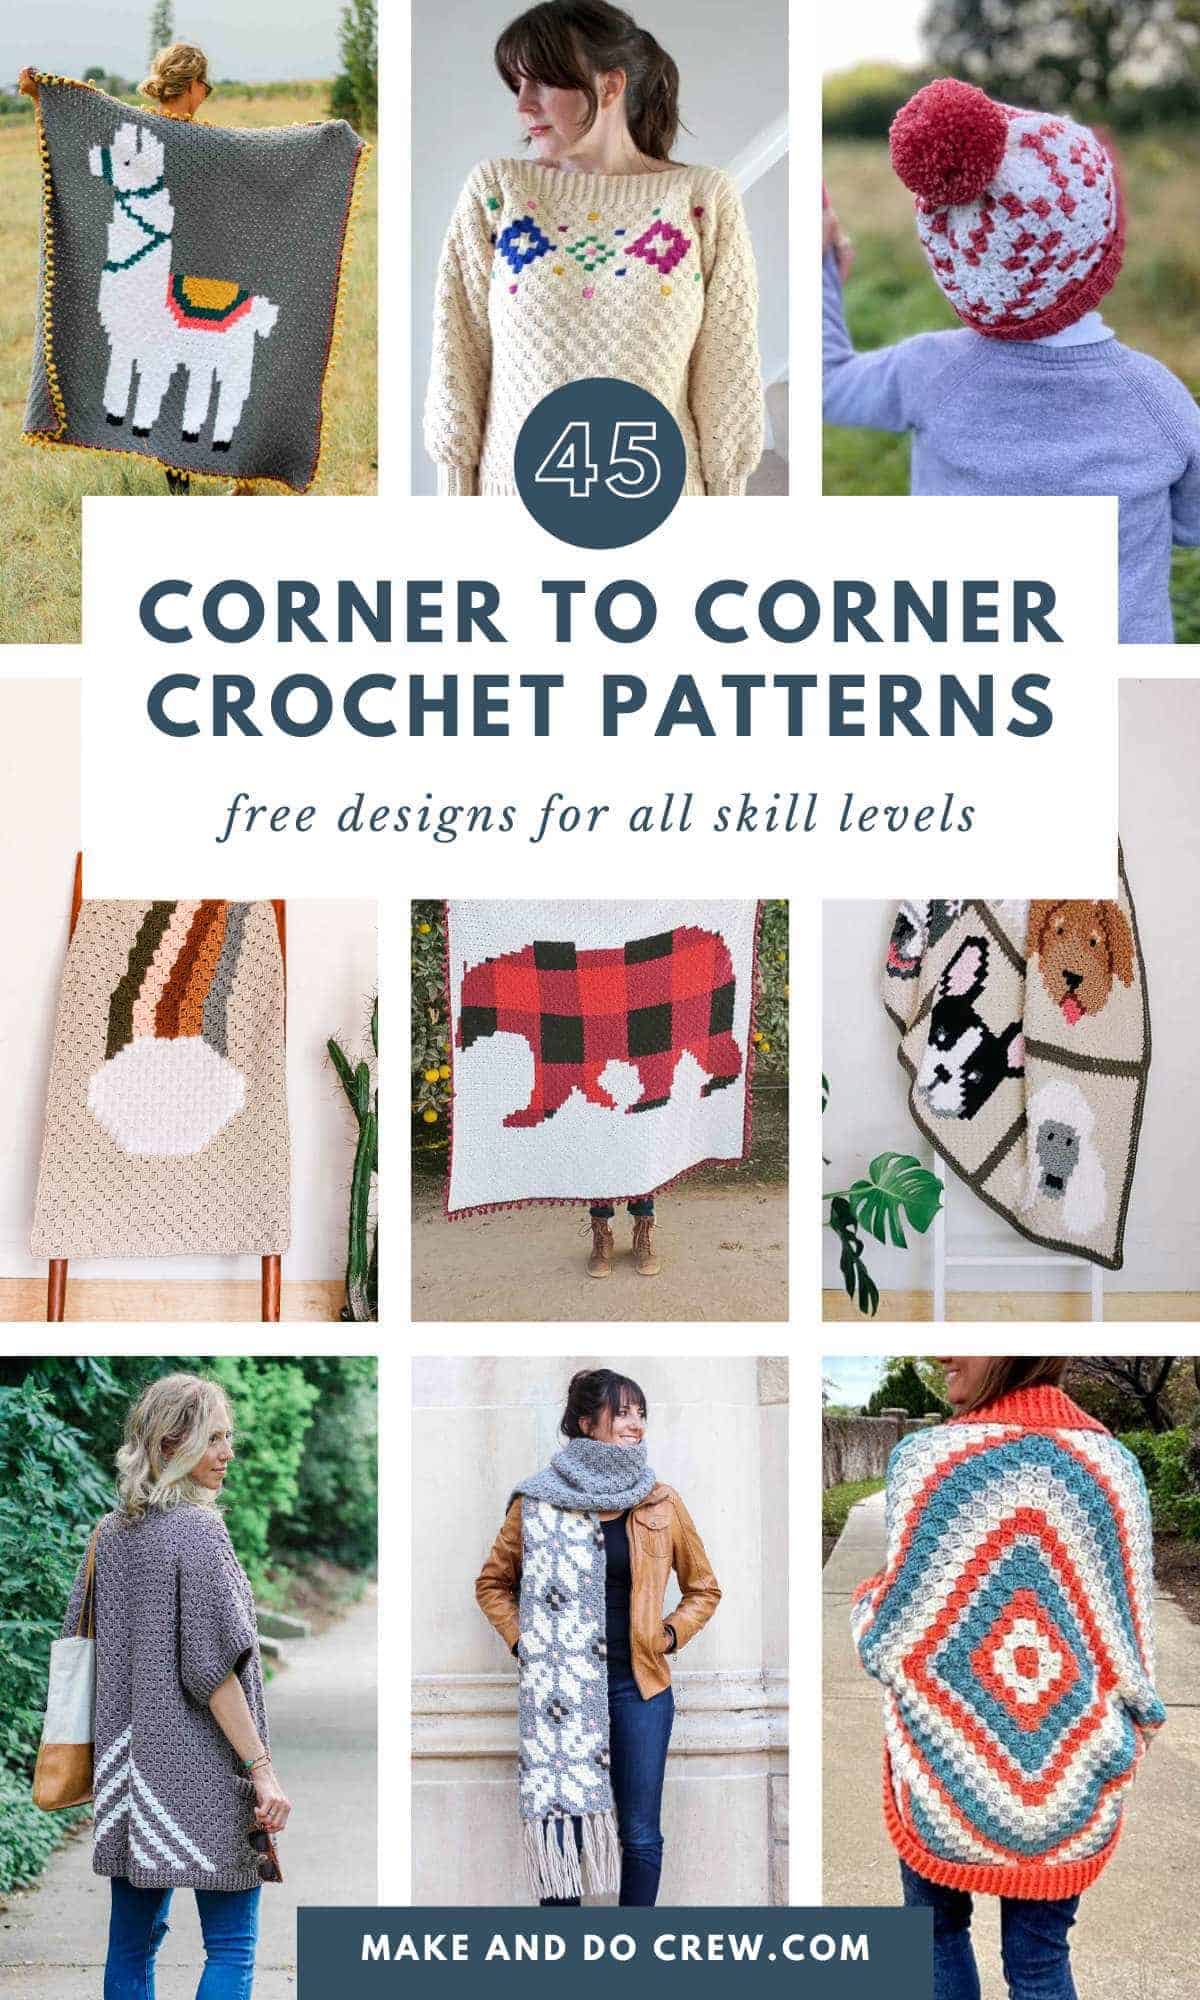 Collection of corner to corner crochet patterns for all skill levels.